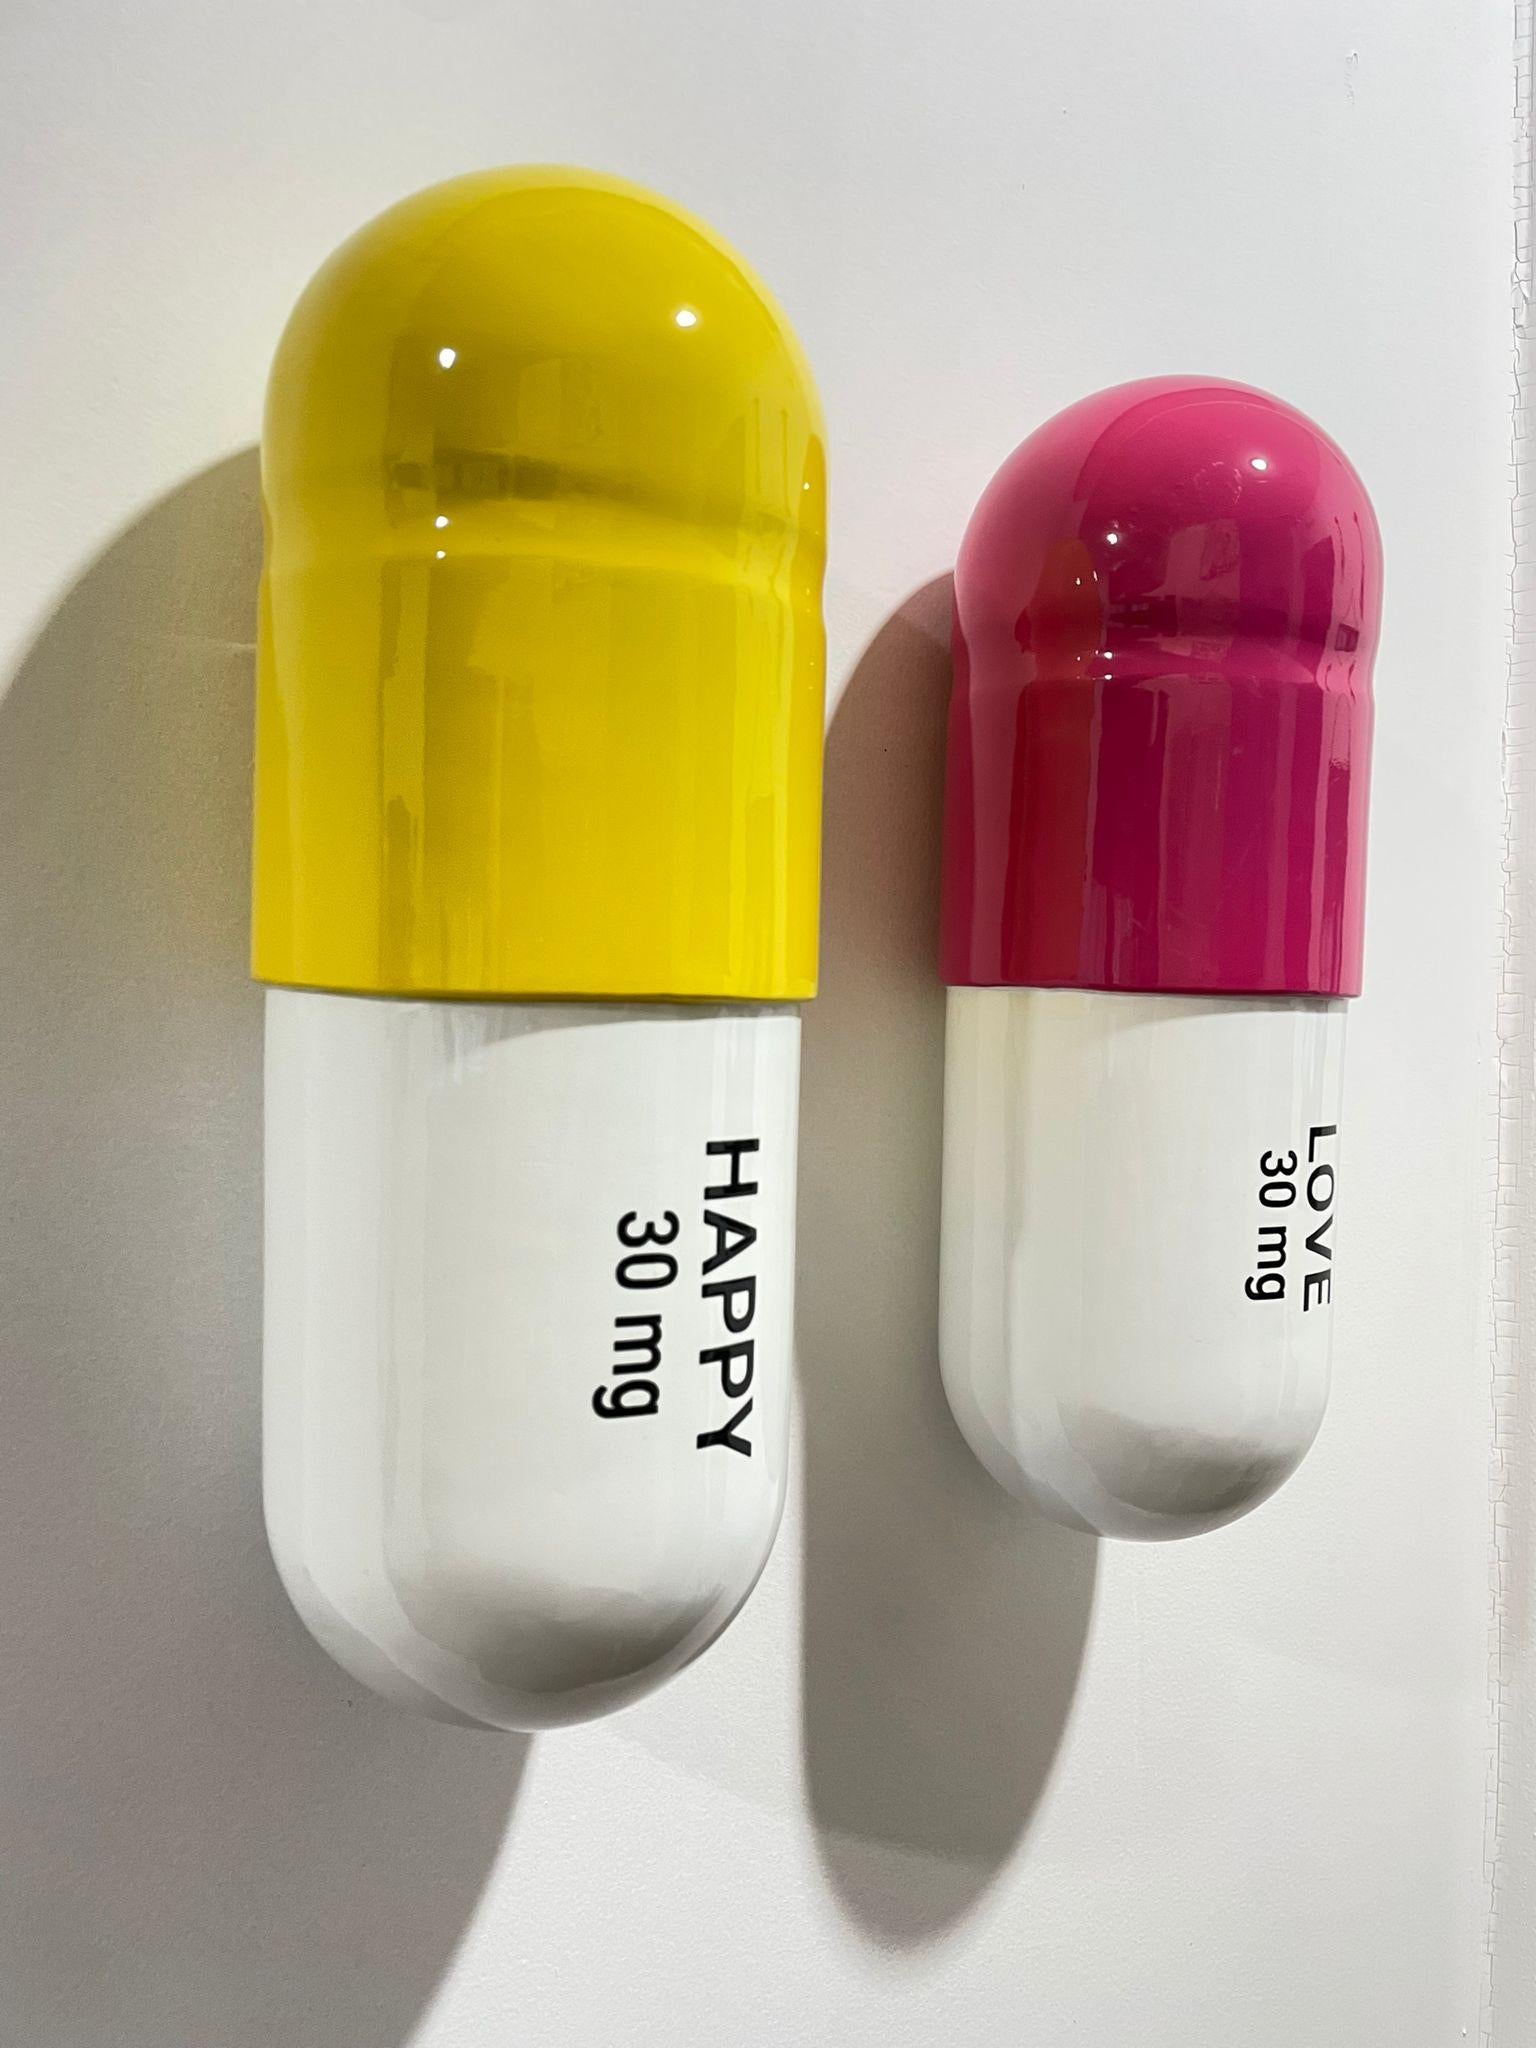 30 MG Love Happy pill Combo (Yellow, magenta pink) - figurative sculpture - Sculpture by Tal Nehoray